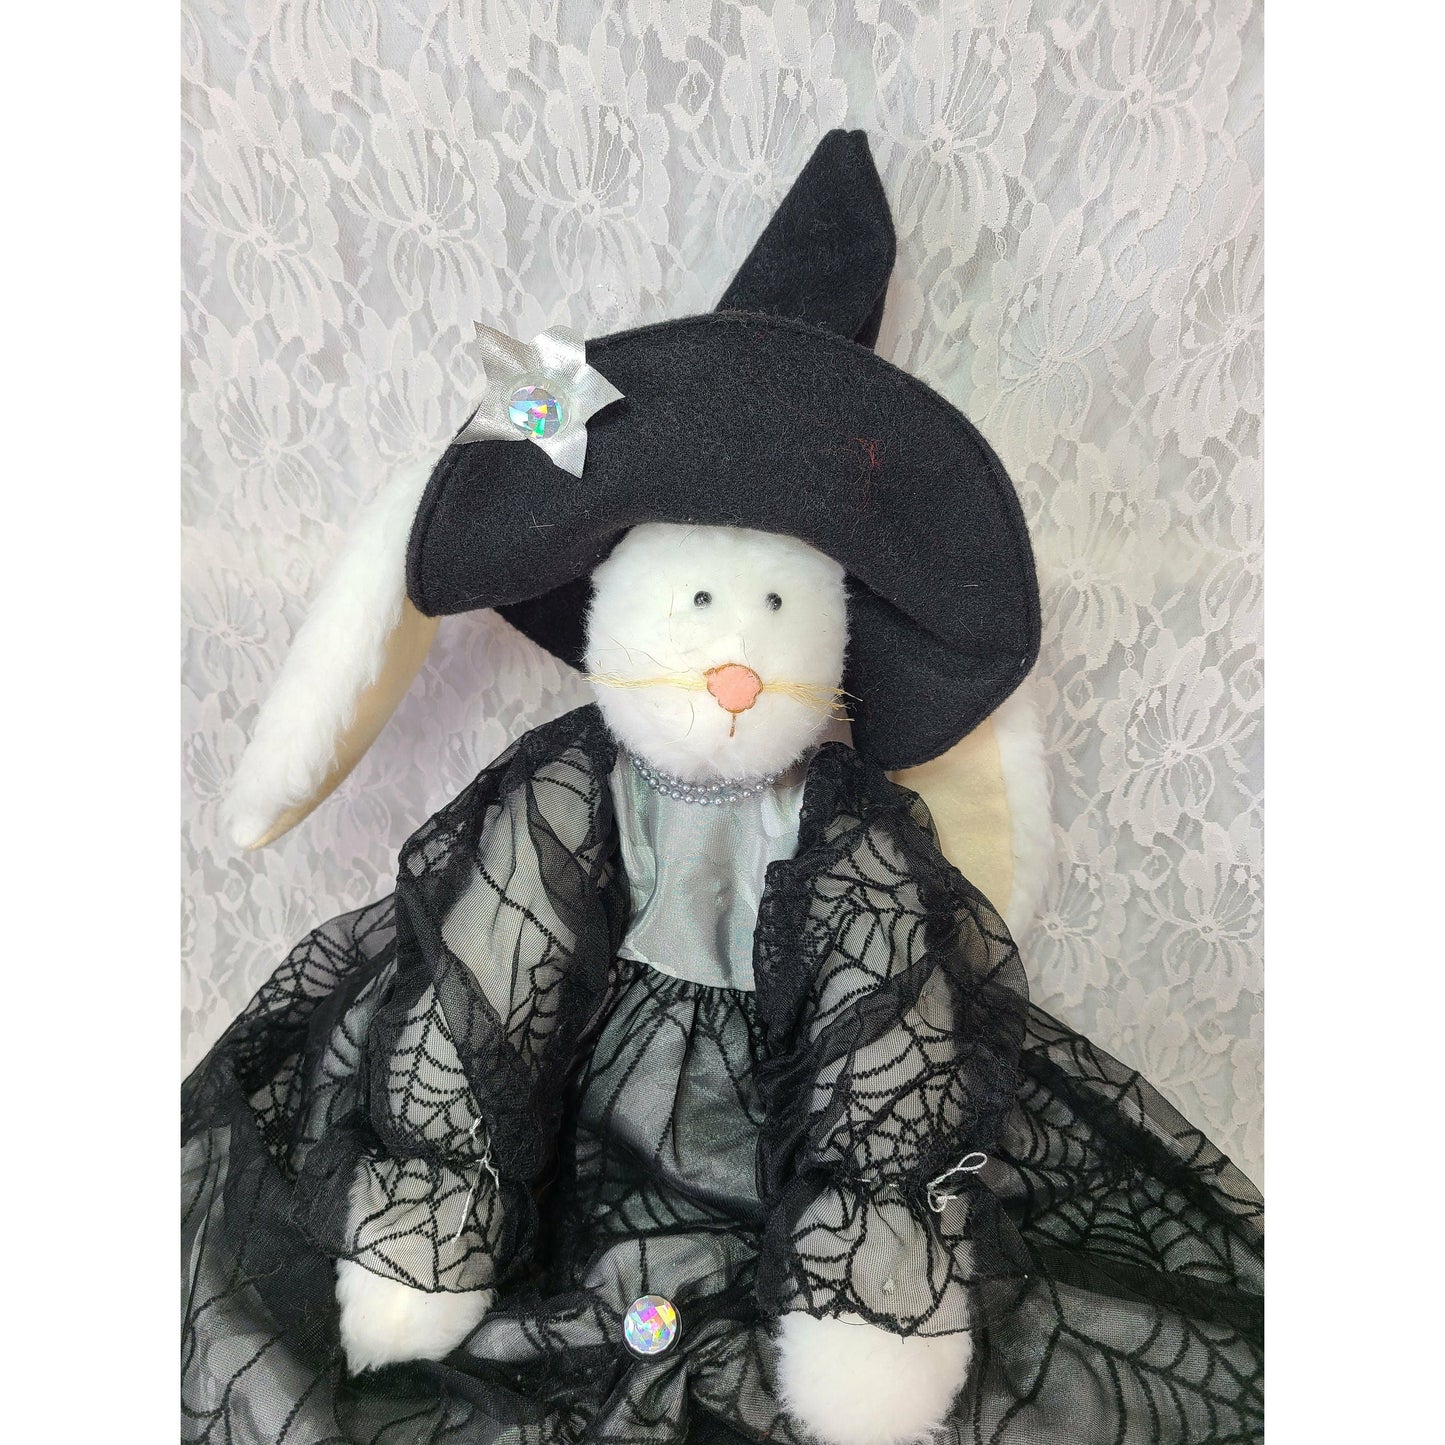 Products Bunny Rabbit WITCH Plush Stuffed Animal ~ Primitive Boutique Halloween 1990s Halloween Décor 24" Cloth Hand Sewn Collectible Shelf Sitter OOAK Doll